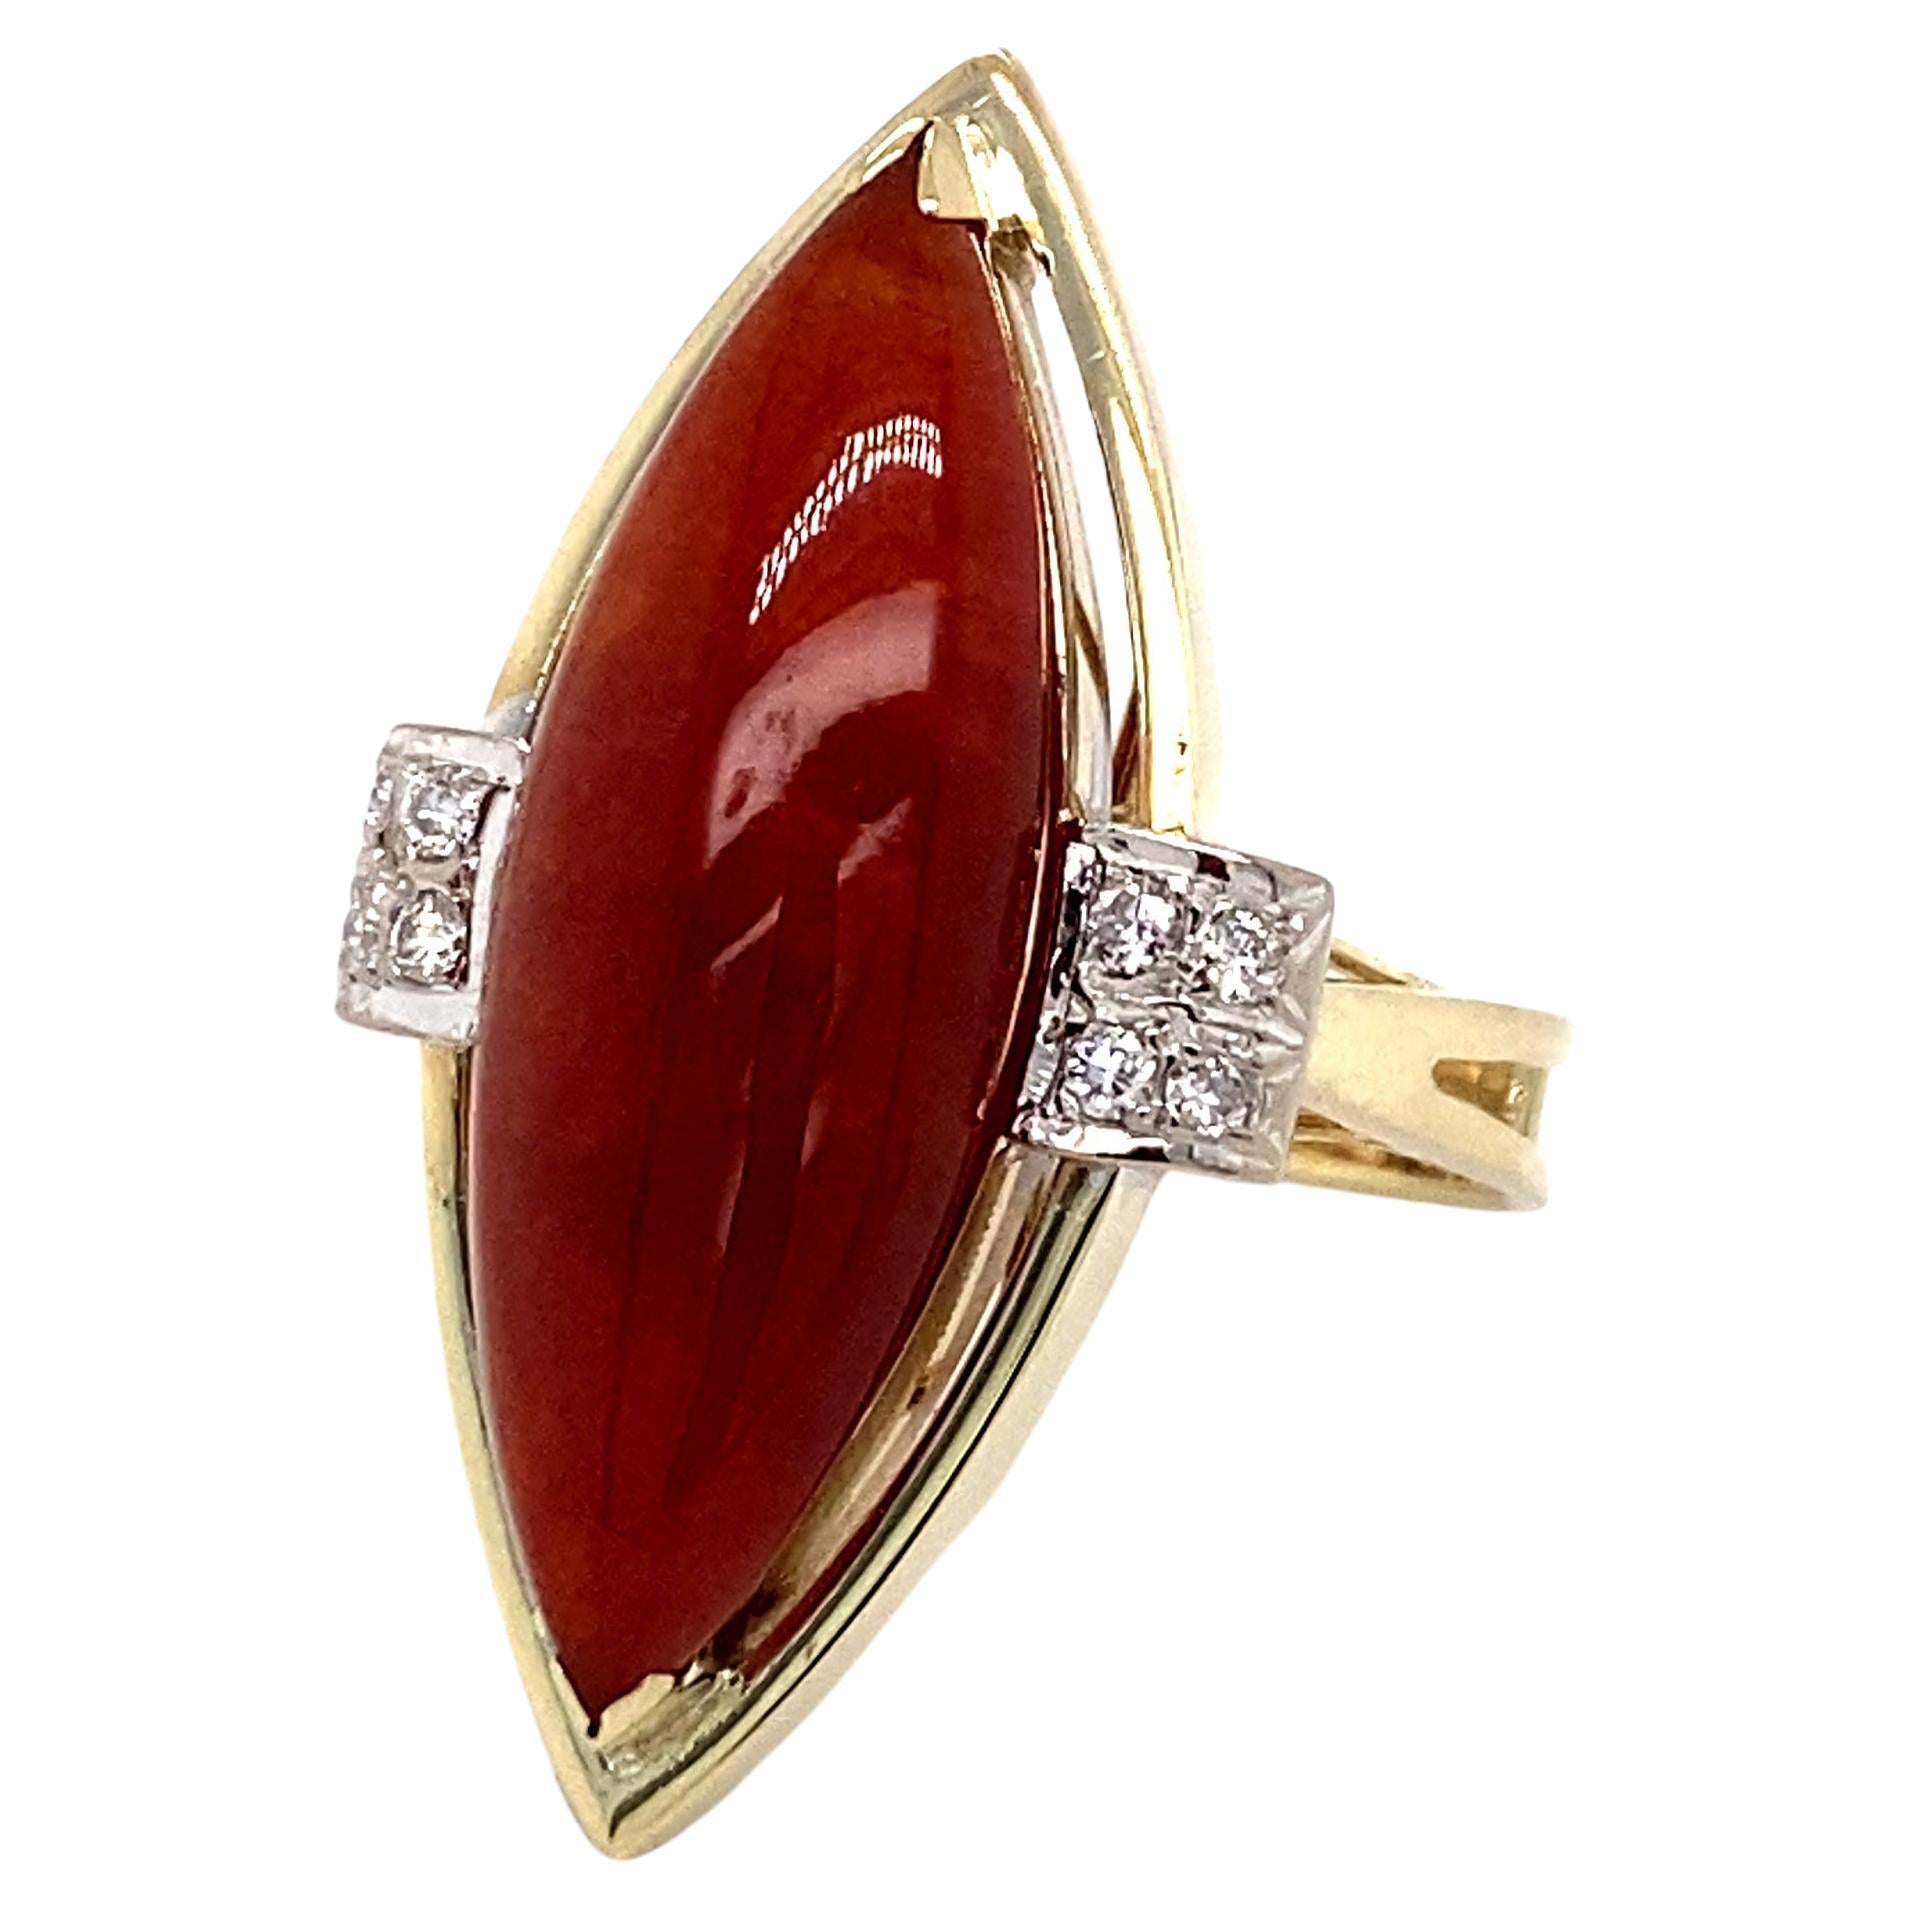 Circa 1950s Marquise Carnelian and Diamond Cocktail Ring in 14K Gold